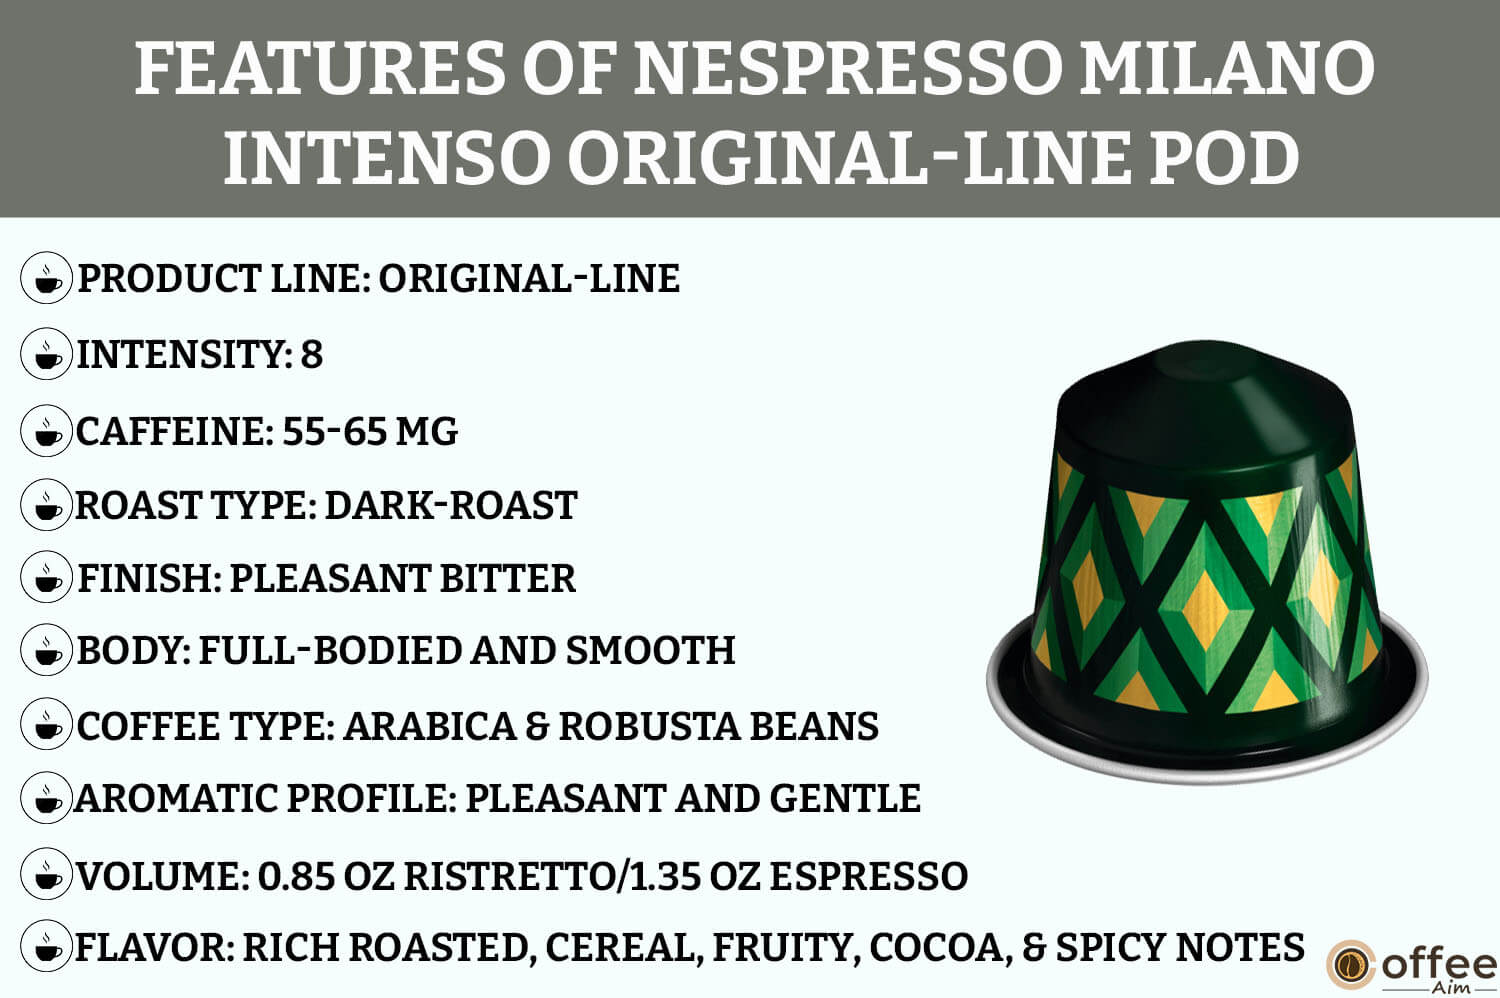 The image details features of the Nespresso Milano Intenso Original-Line Pod, enhancing the "Nespresso Milano Intenso Pod Review" article.